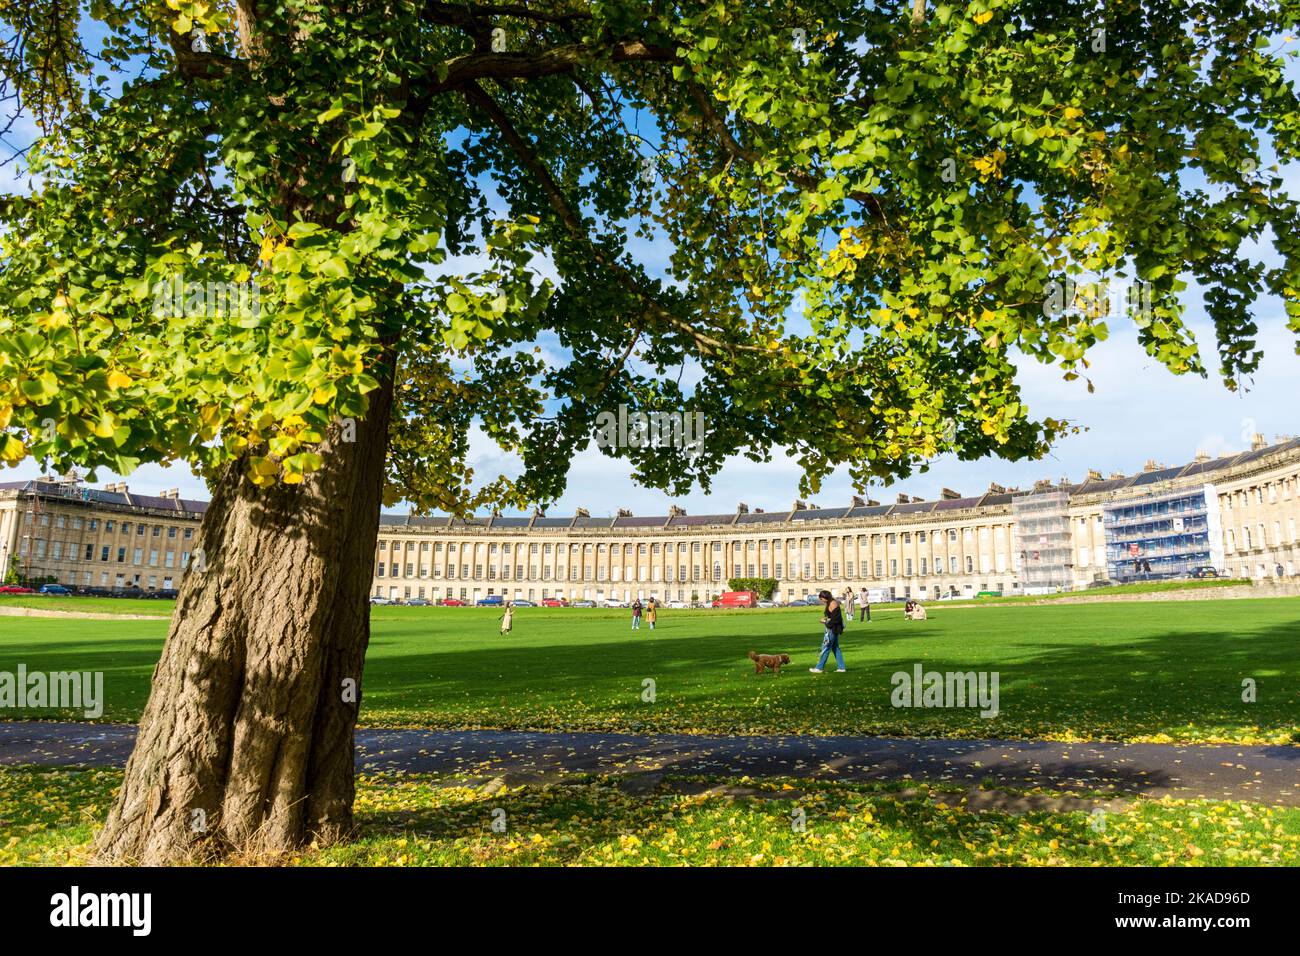 The Royal Crescent, one of Bath's most iconic landmarks, was built between 1767 and 1775 and designed by John Wood the Younger. Bath, Somerset, Englan Stock Photo